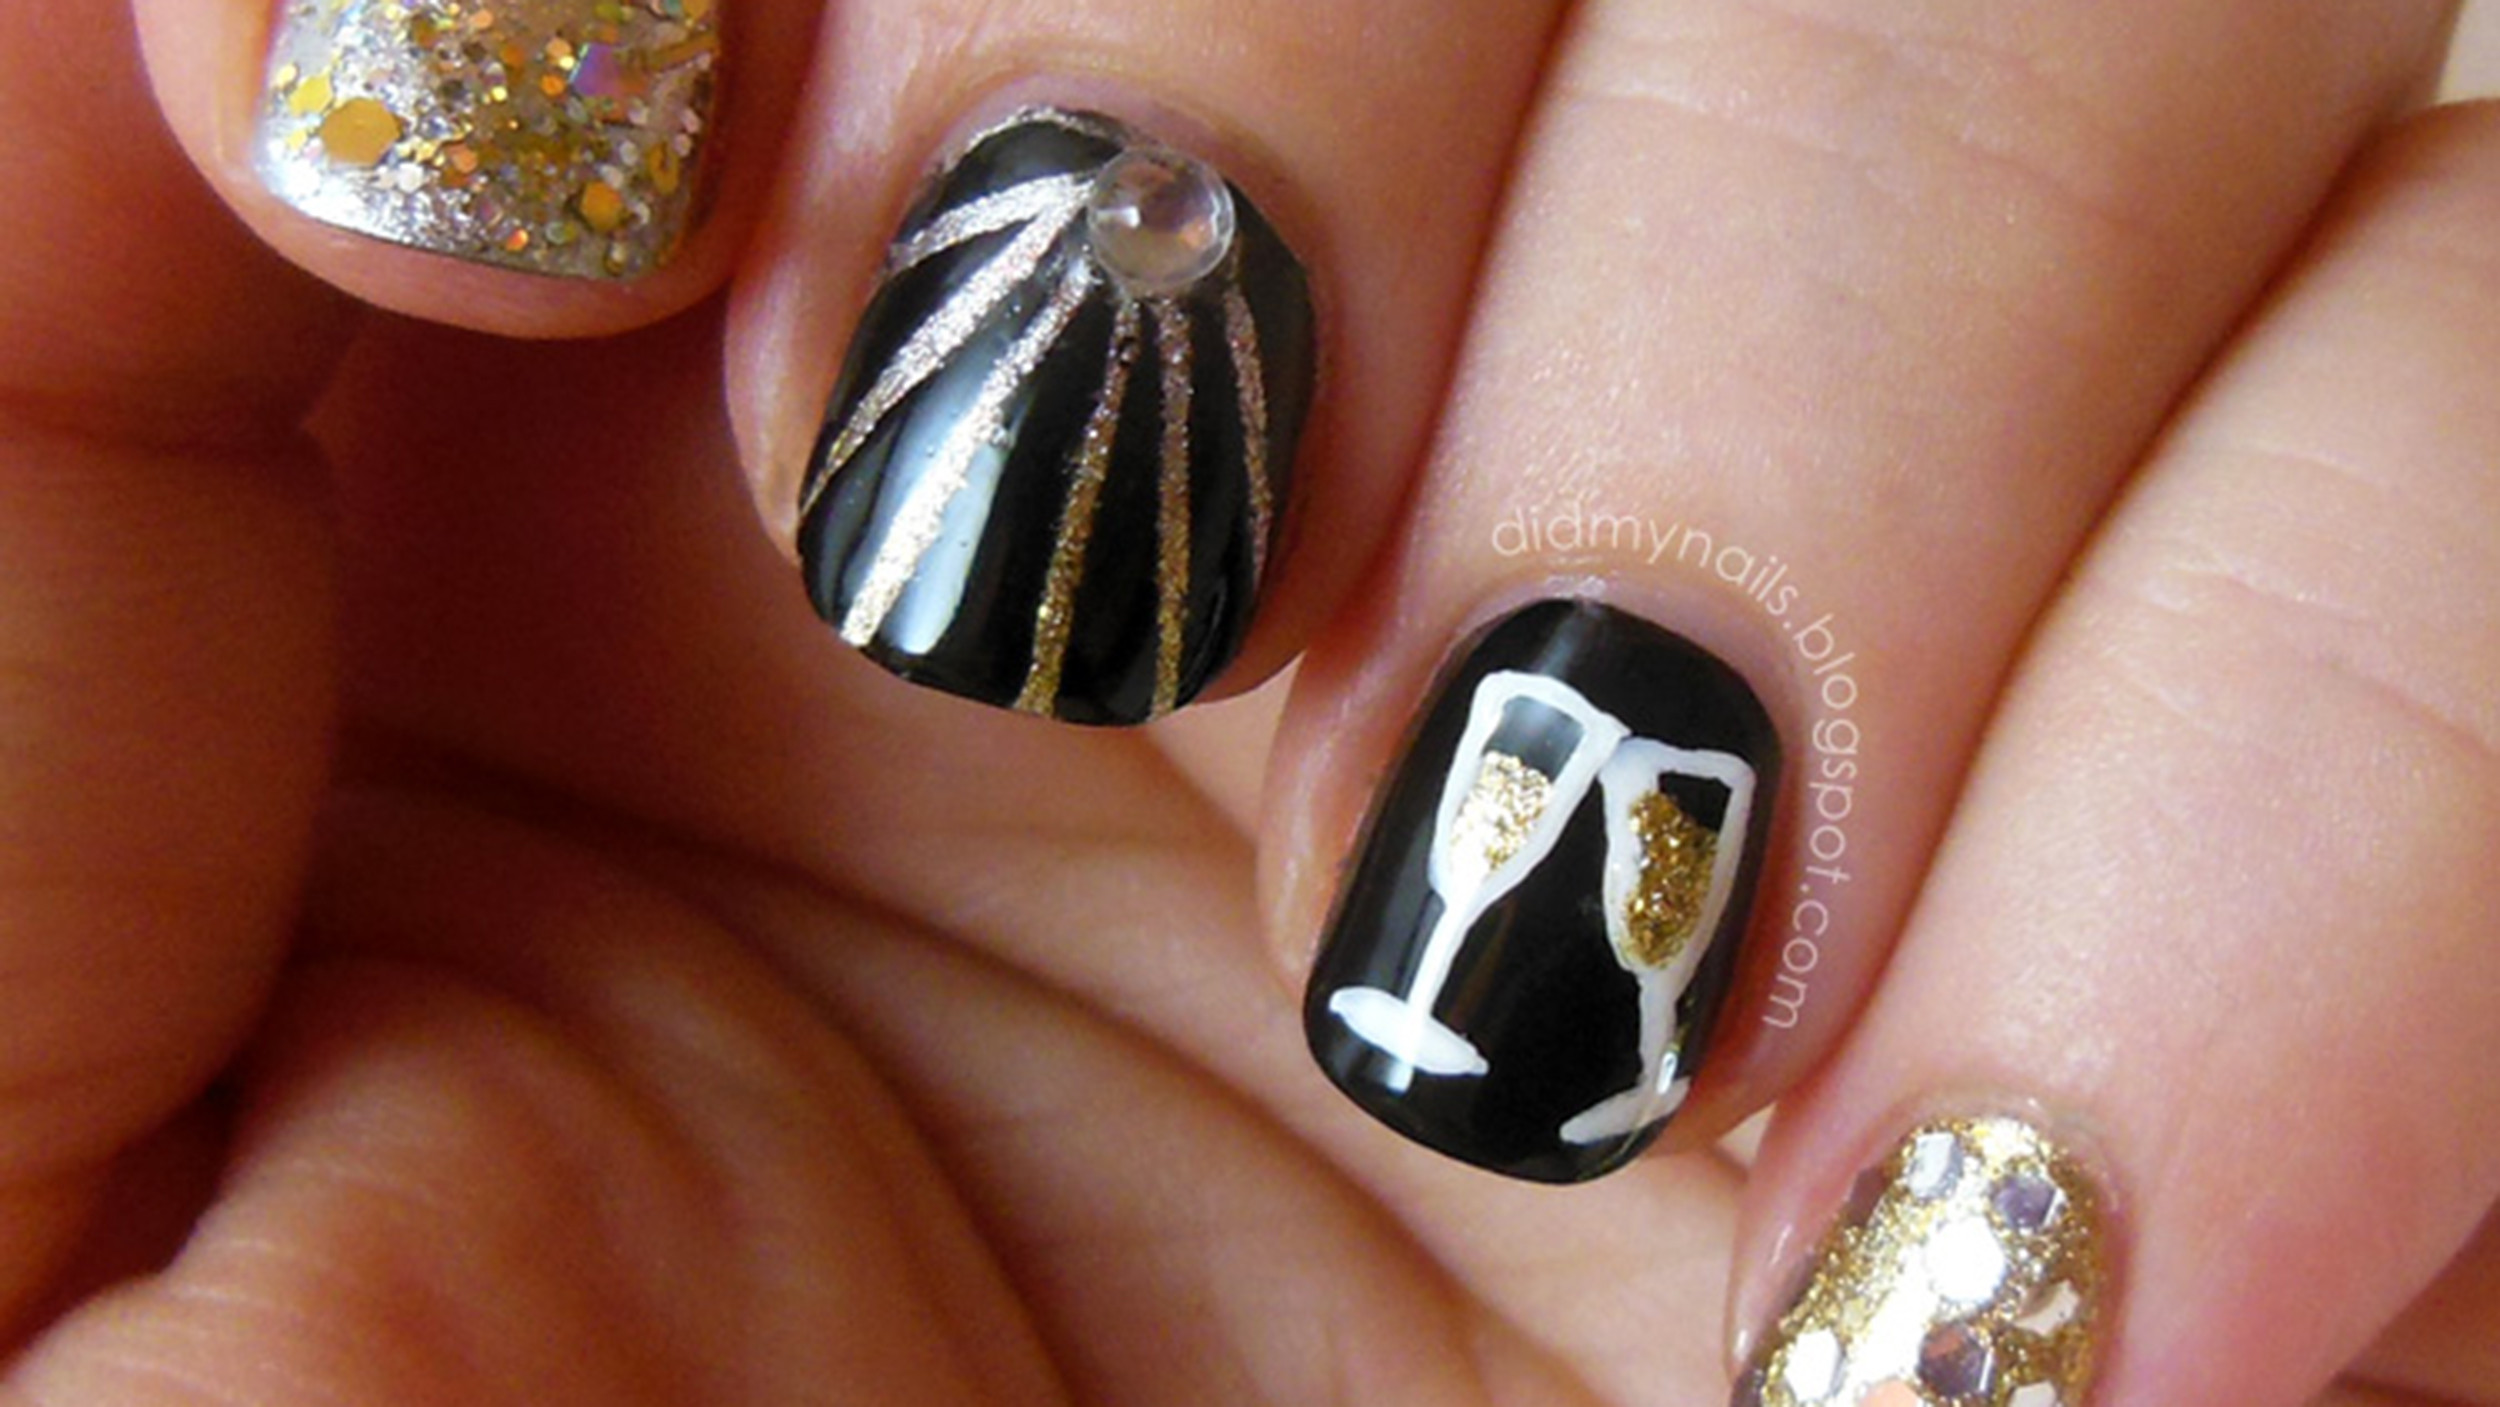 New Years Eve Nail Art
 New Year s Eve nail art ideas as pretty as your party